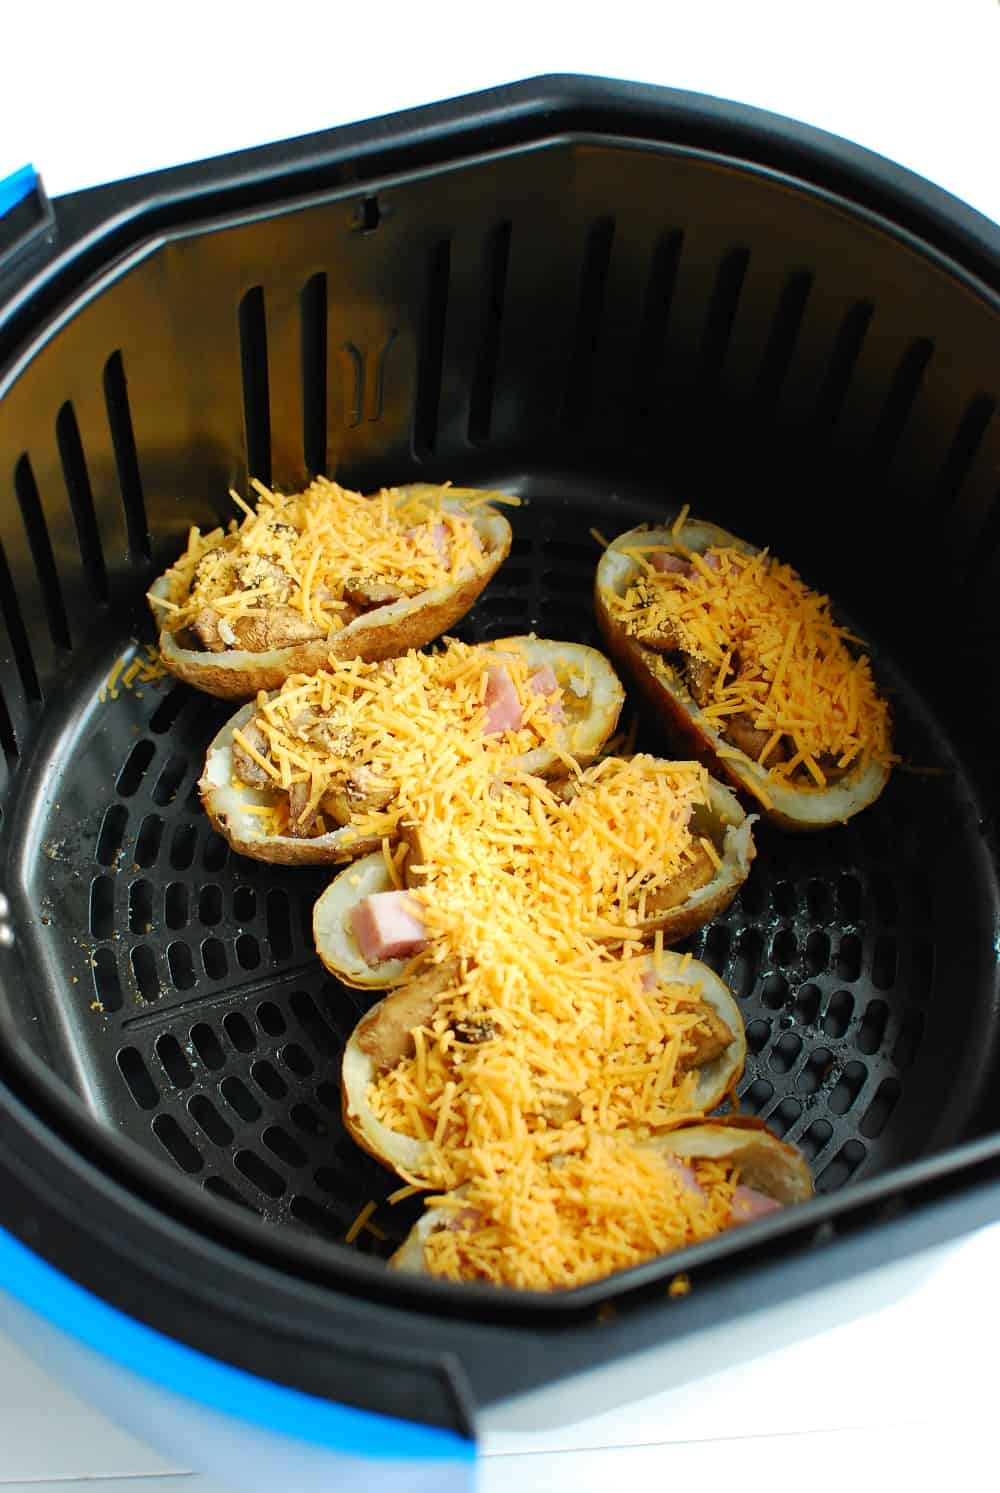 Potato skins topped with extra cheese in an air fryer basket